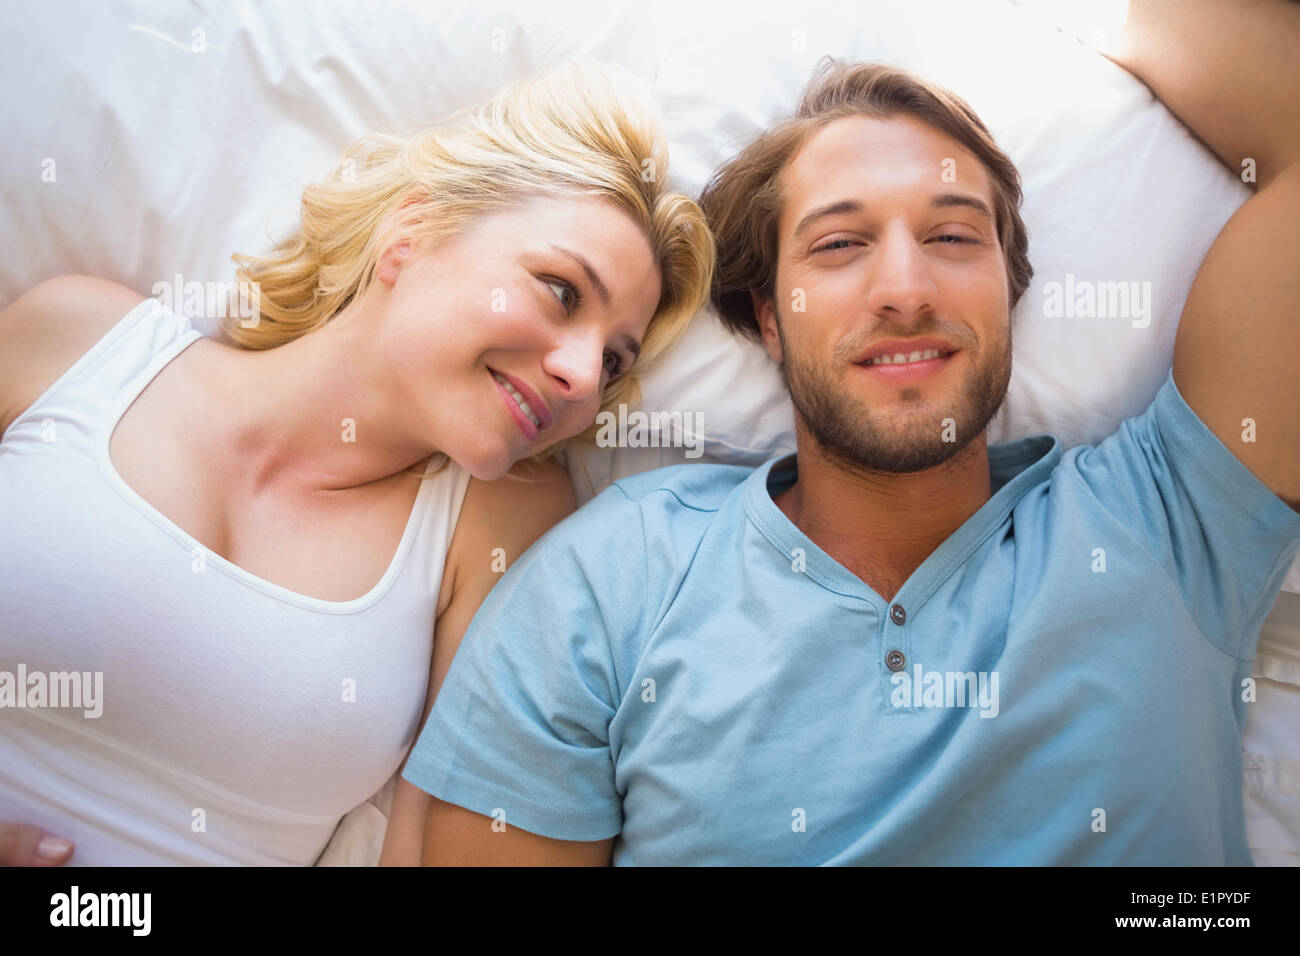 Happy couple relaxing on bed Stock Photo